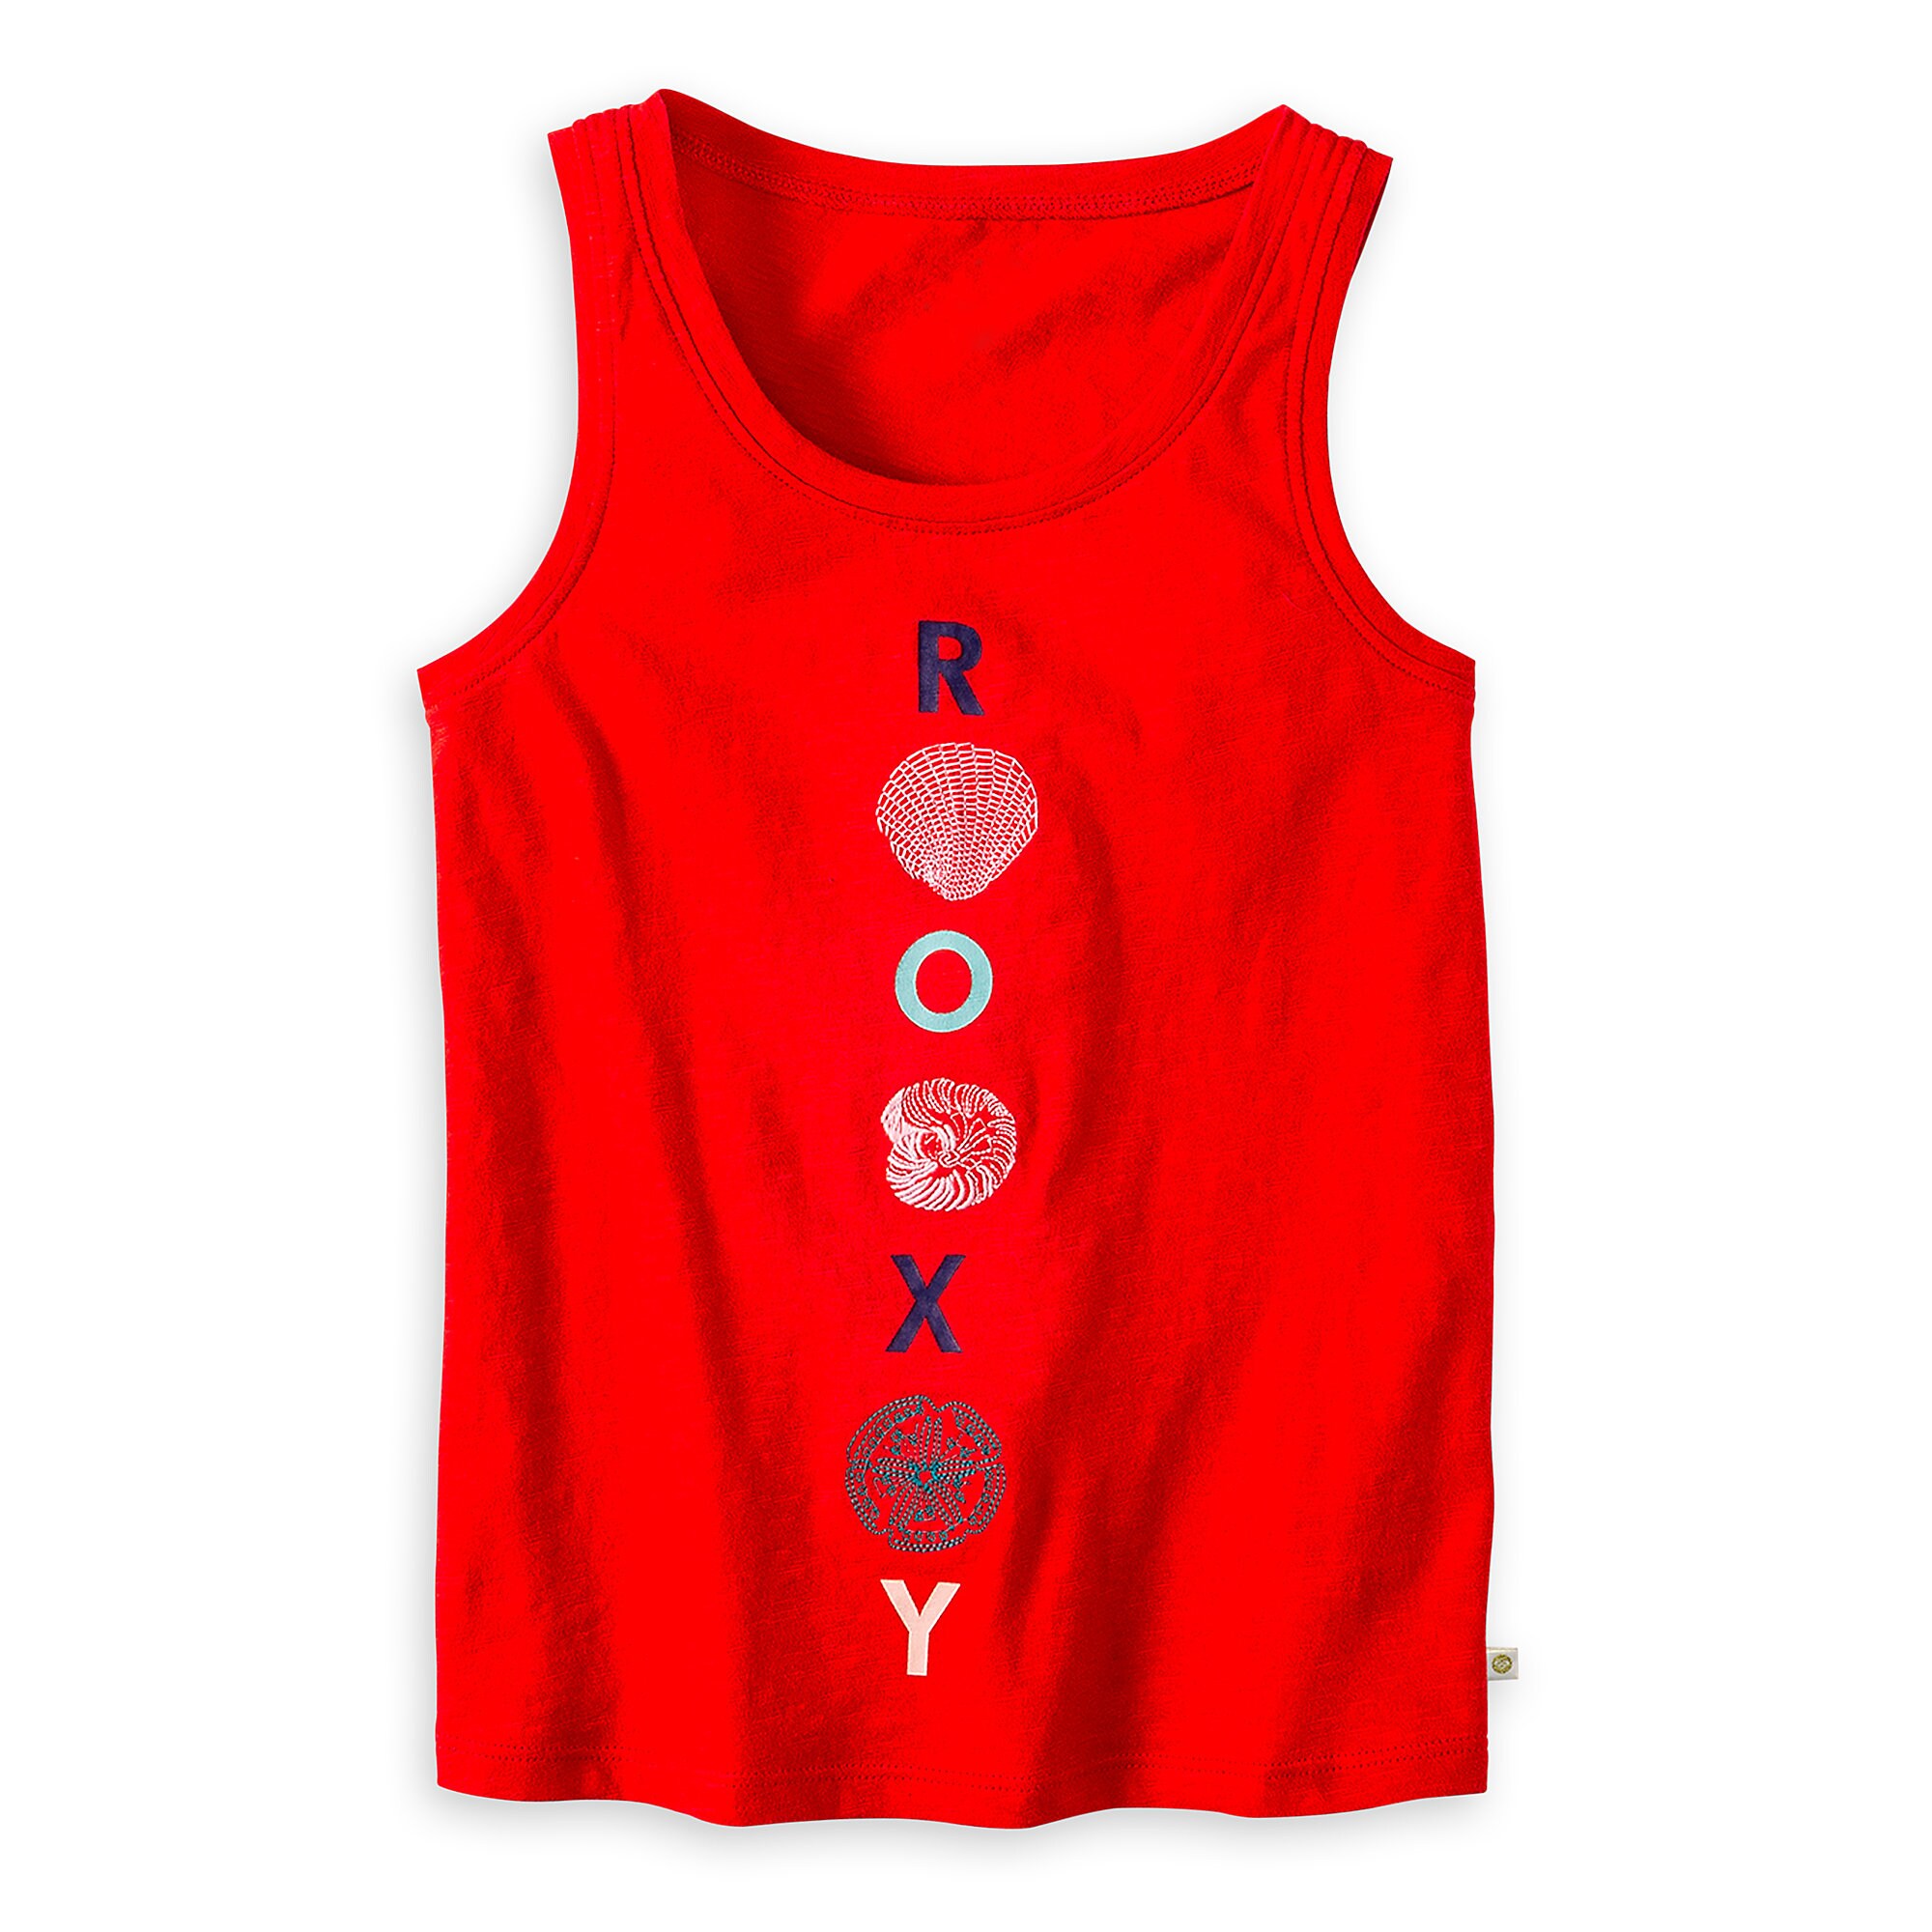 The Little Mermaid Tank Top for Girls by ROXY Girl